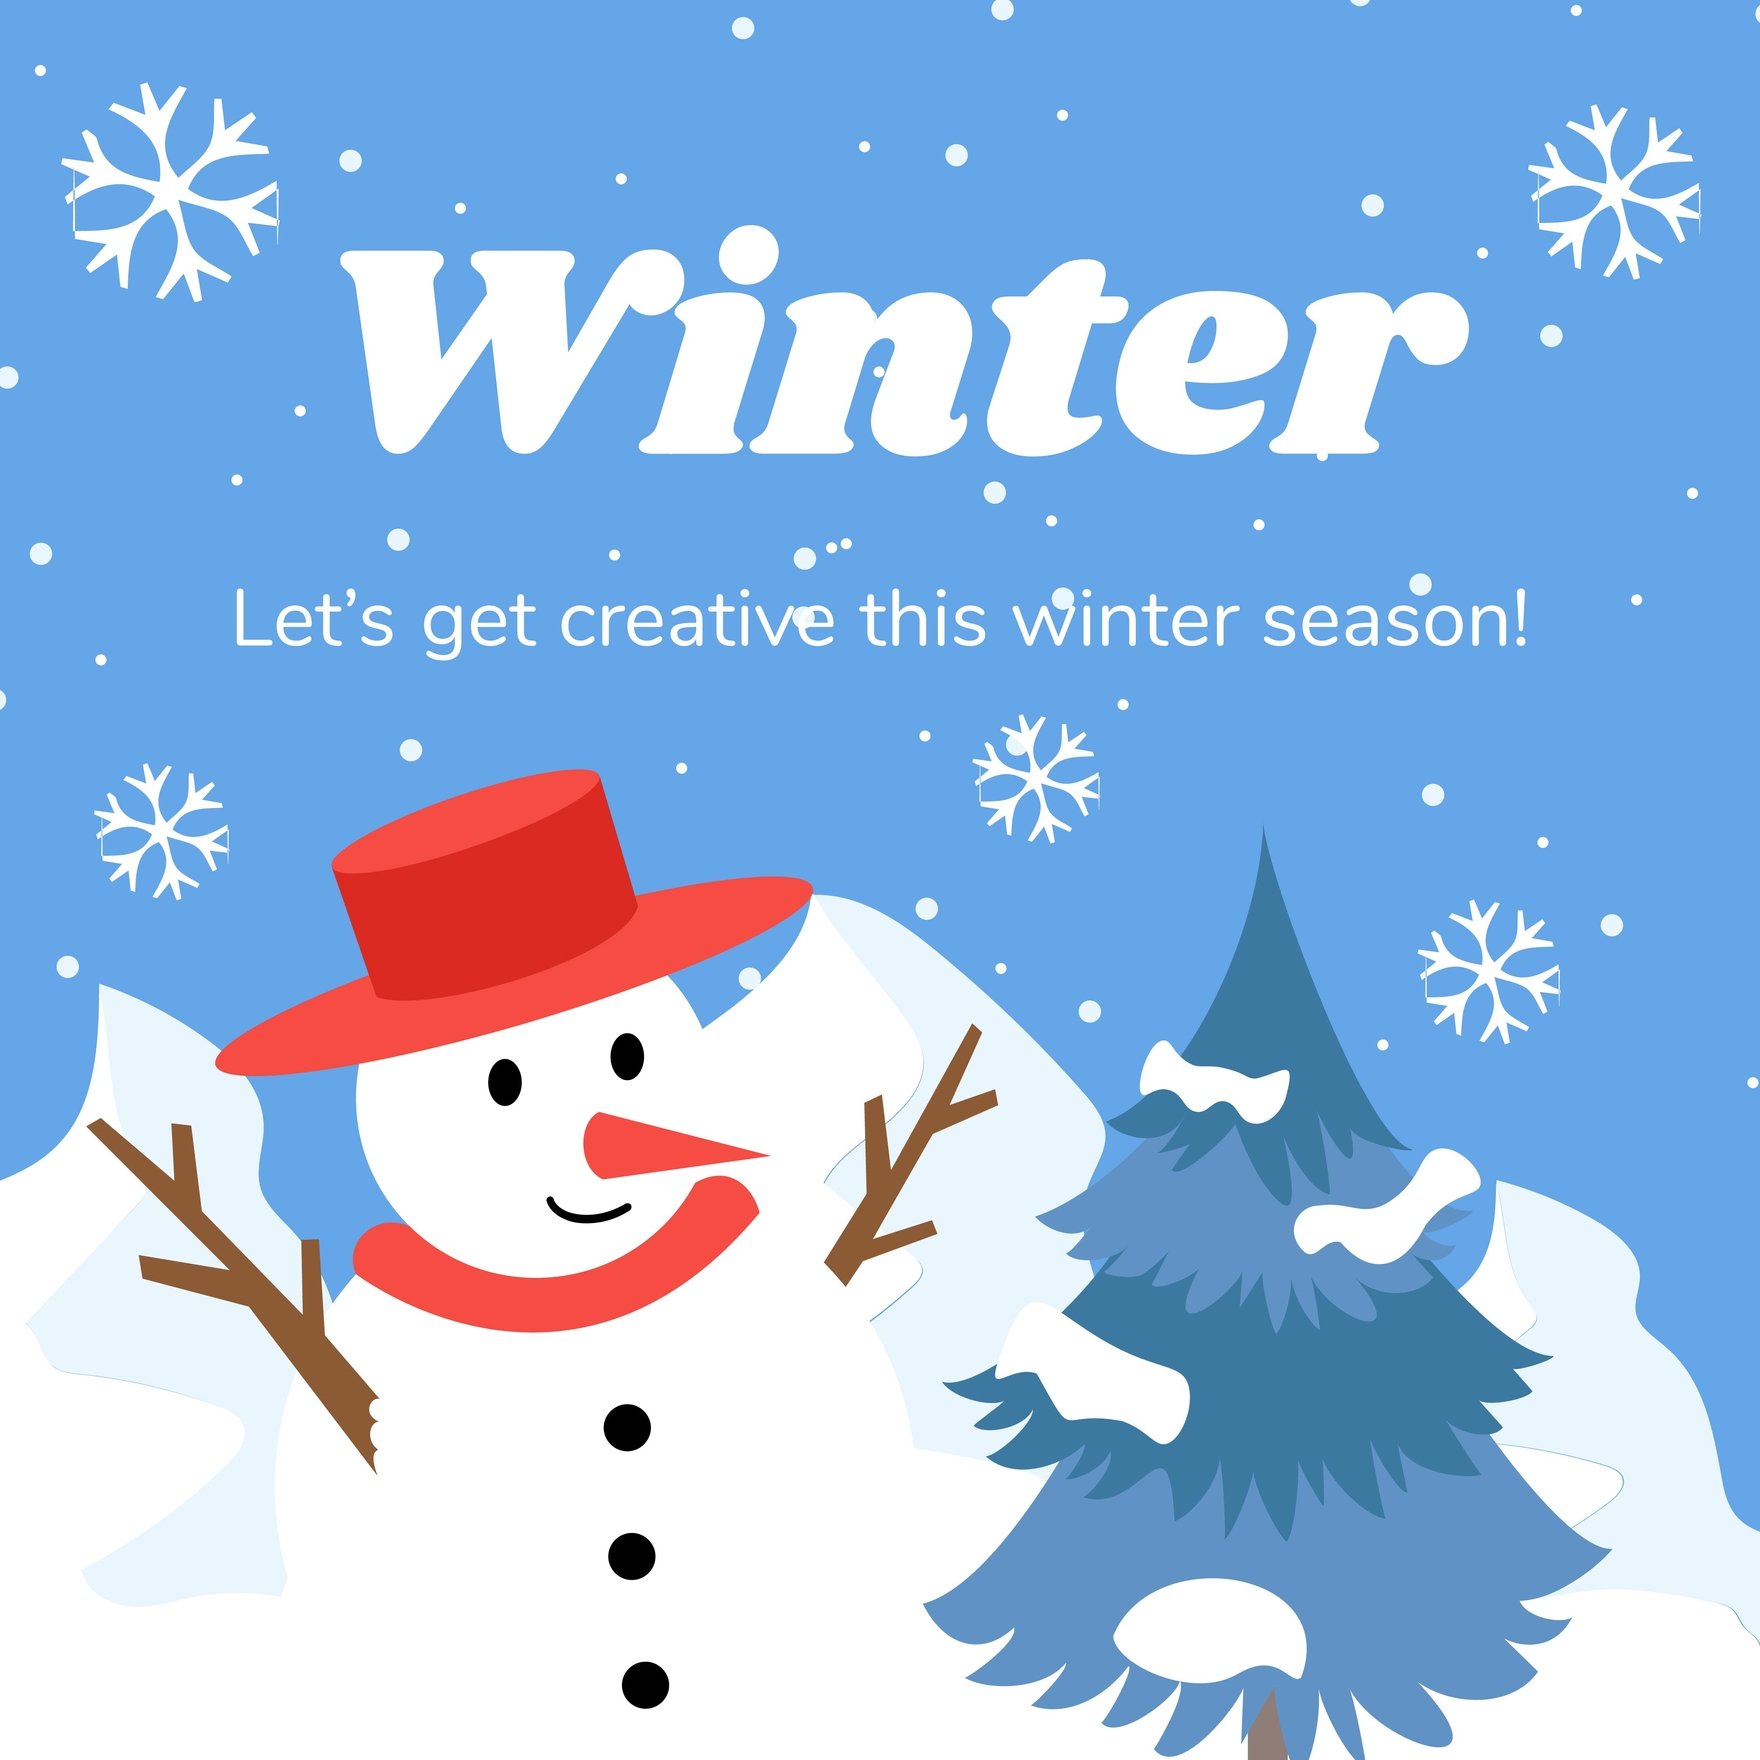 Insta Winter Look  Play Now Online for Free 